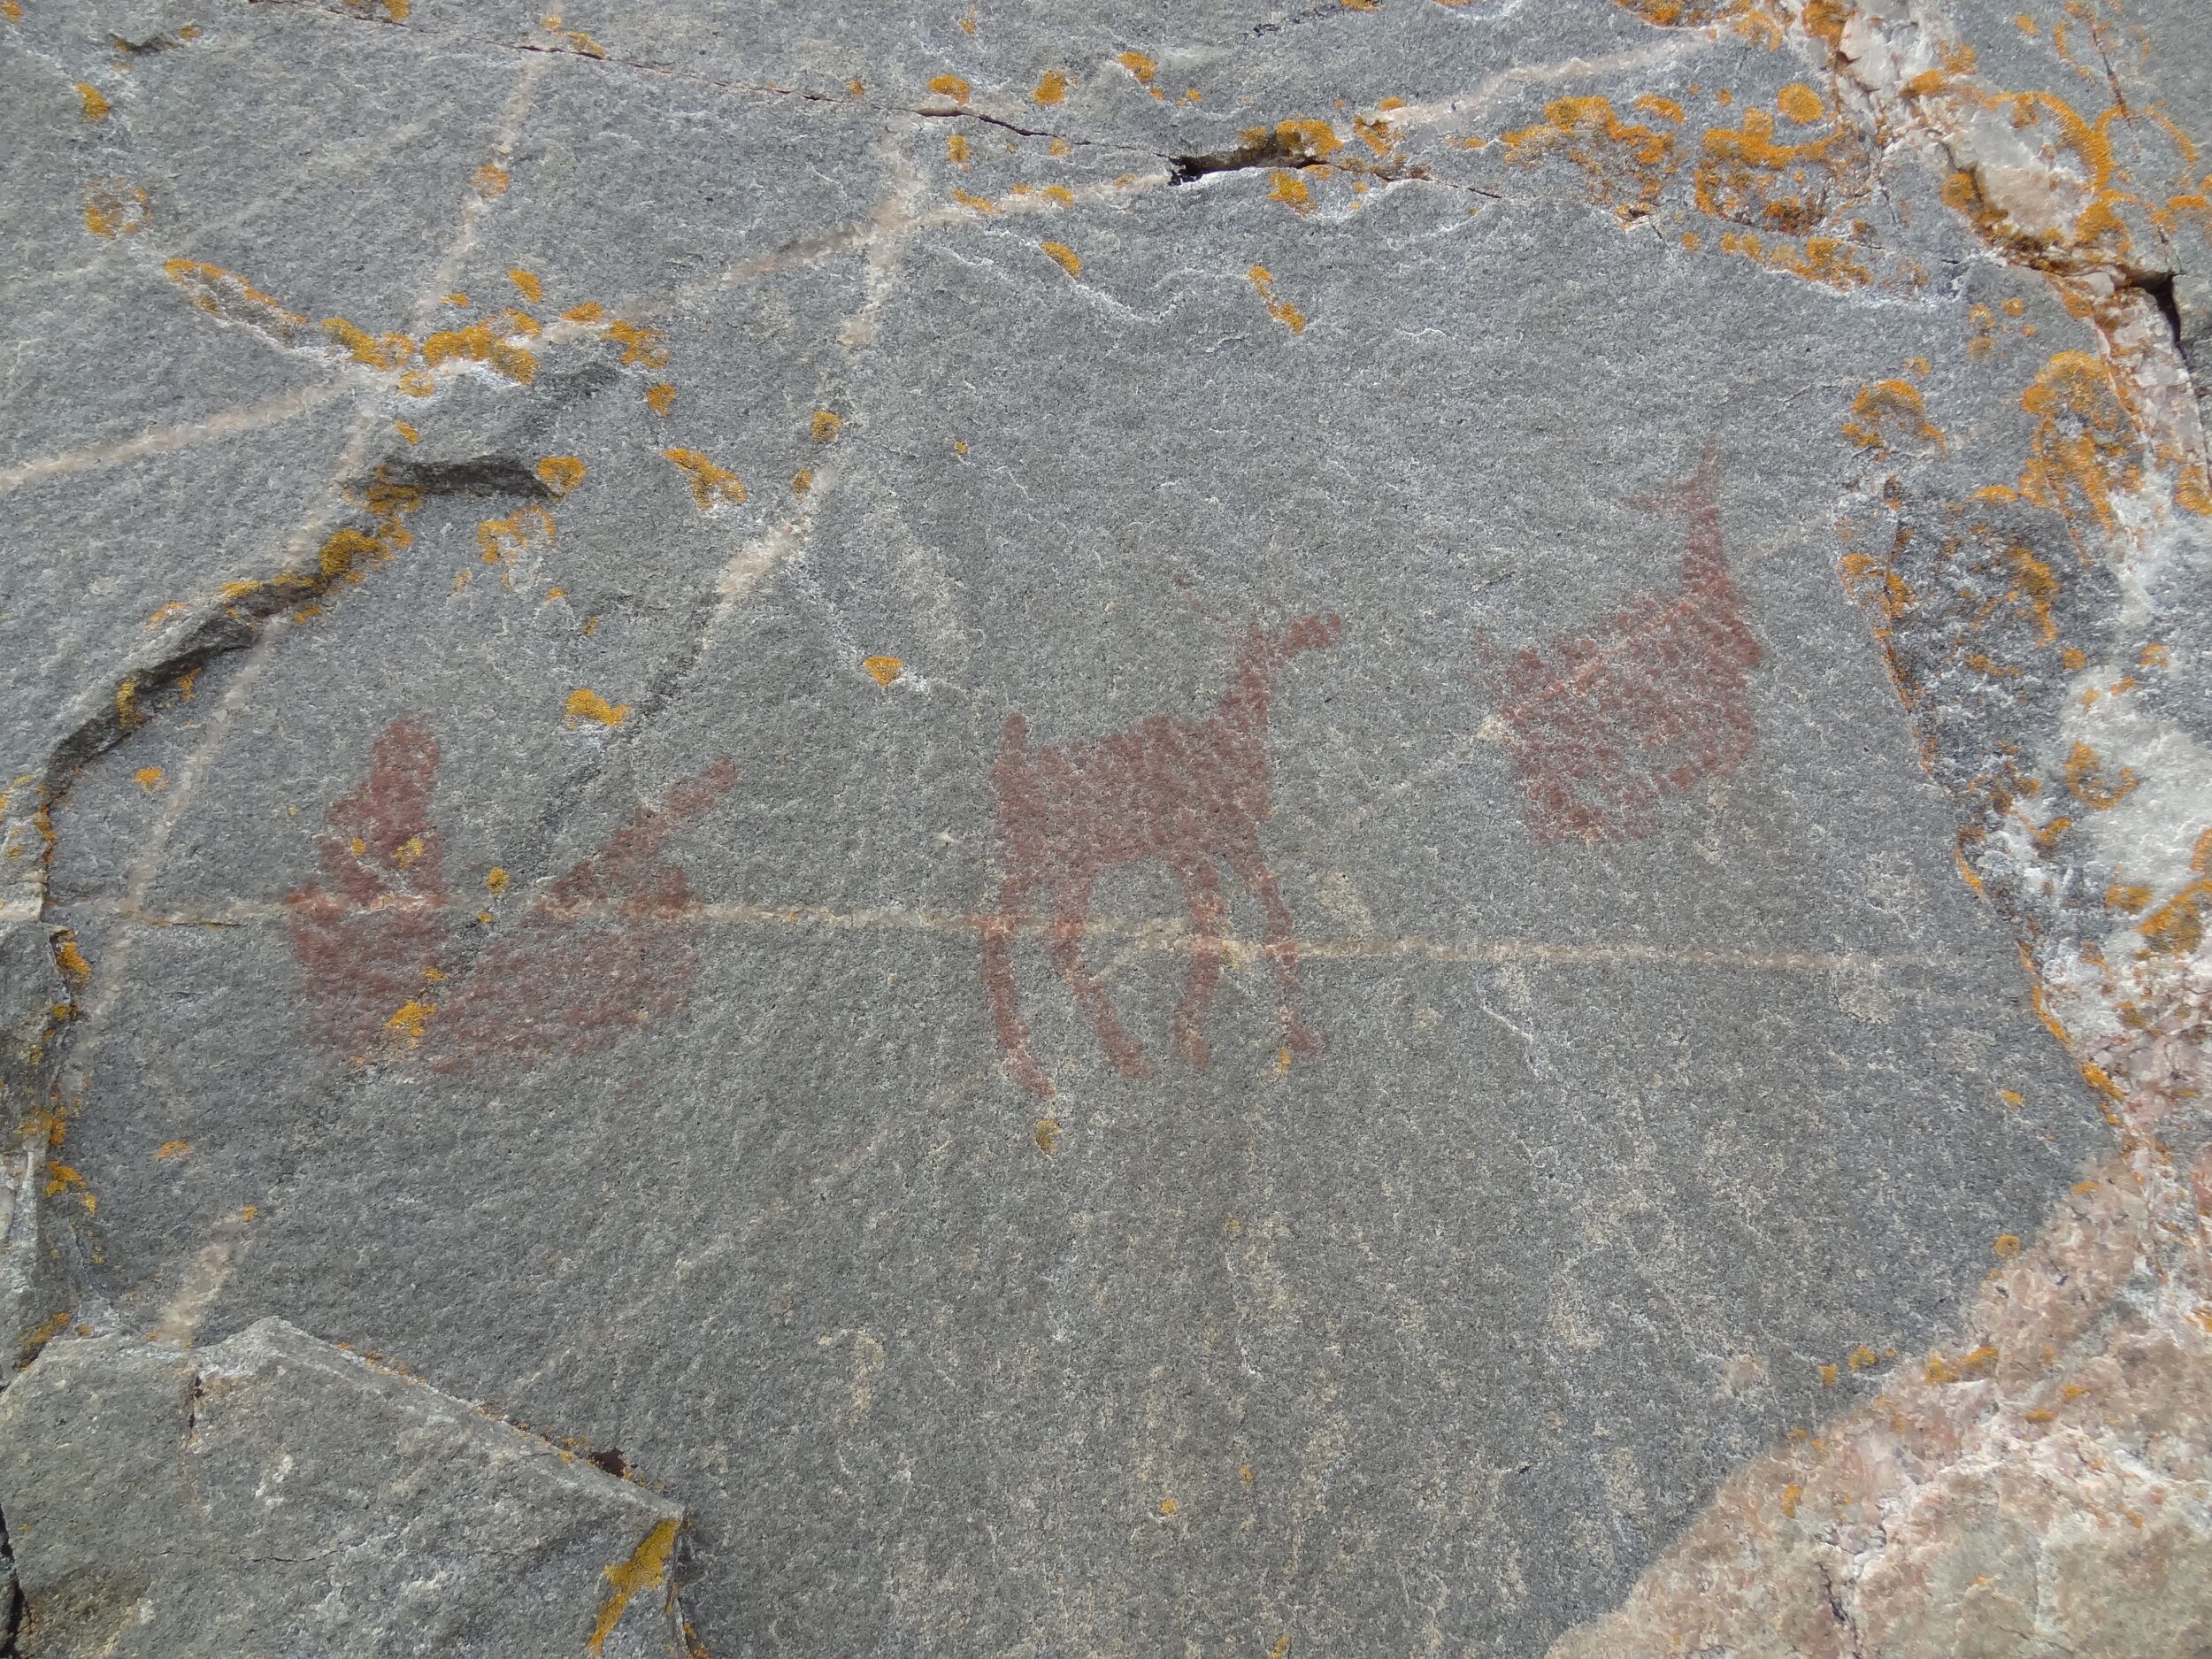 Pictographs on the side of a sheer rock face at Lake Superior Provincial Park.